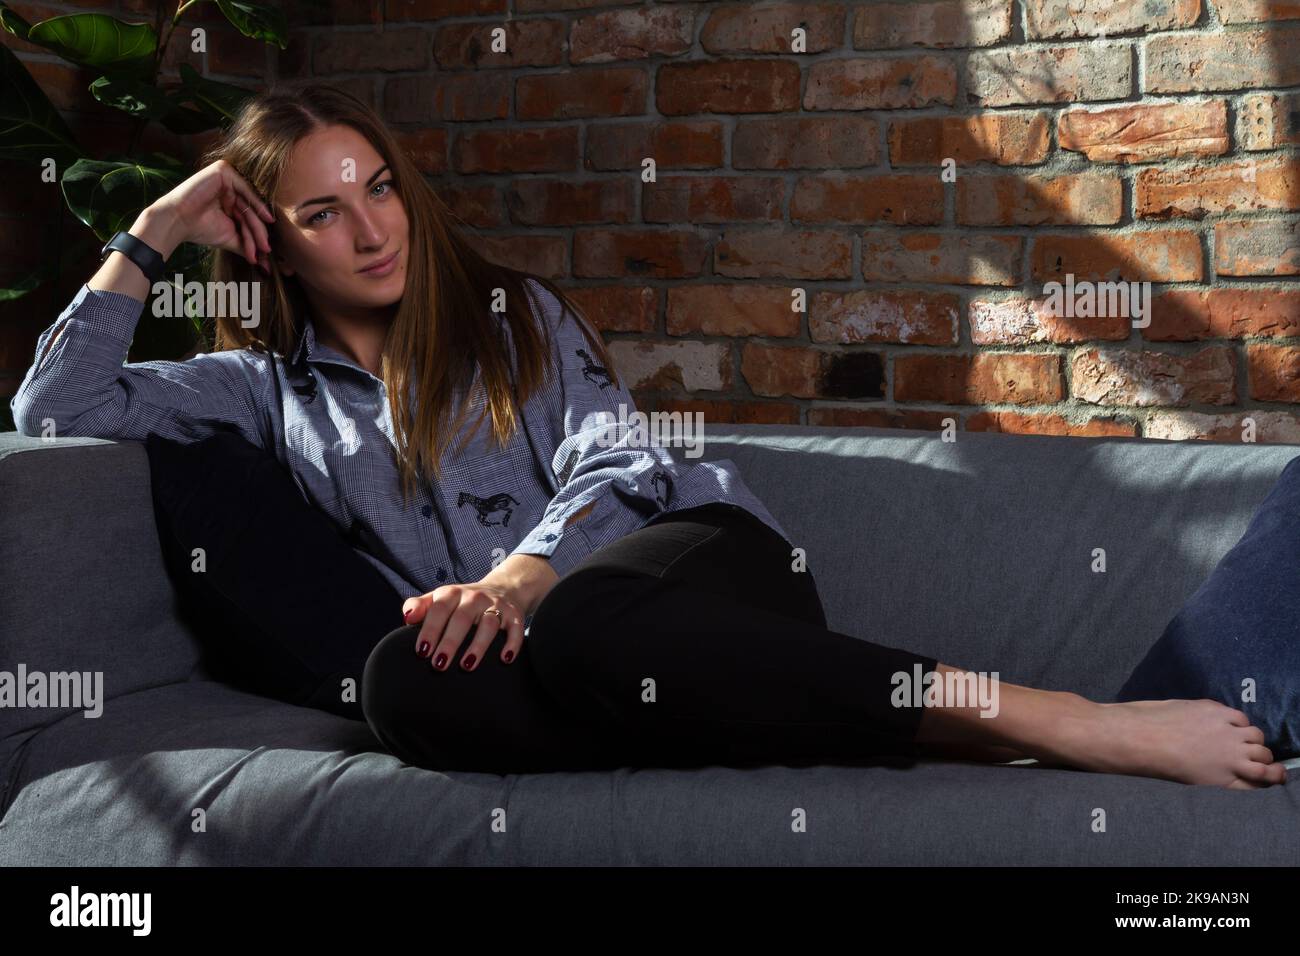 Woman in a blue shirt relaxing on the couch, looking into the camera Stock Photo